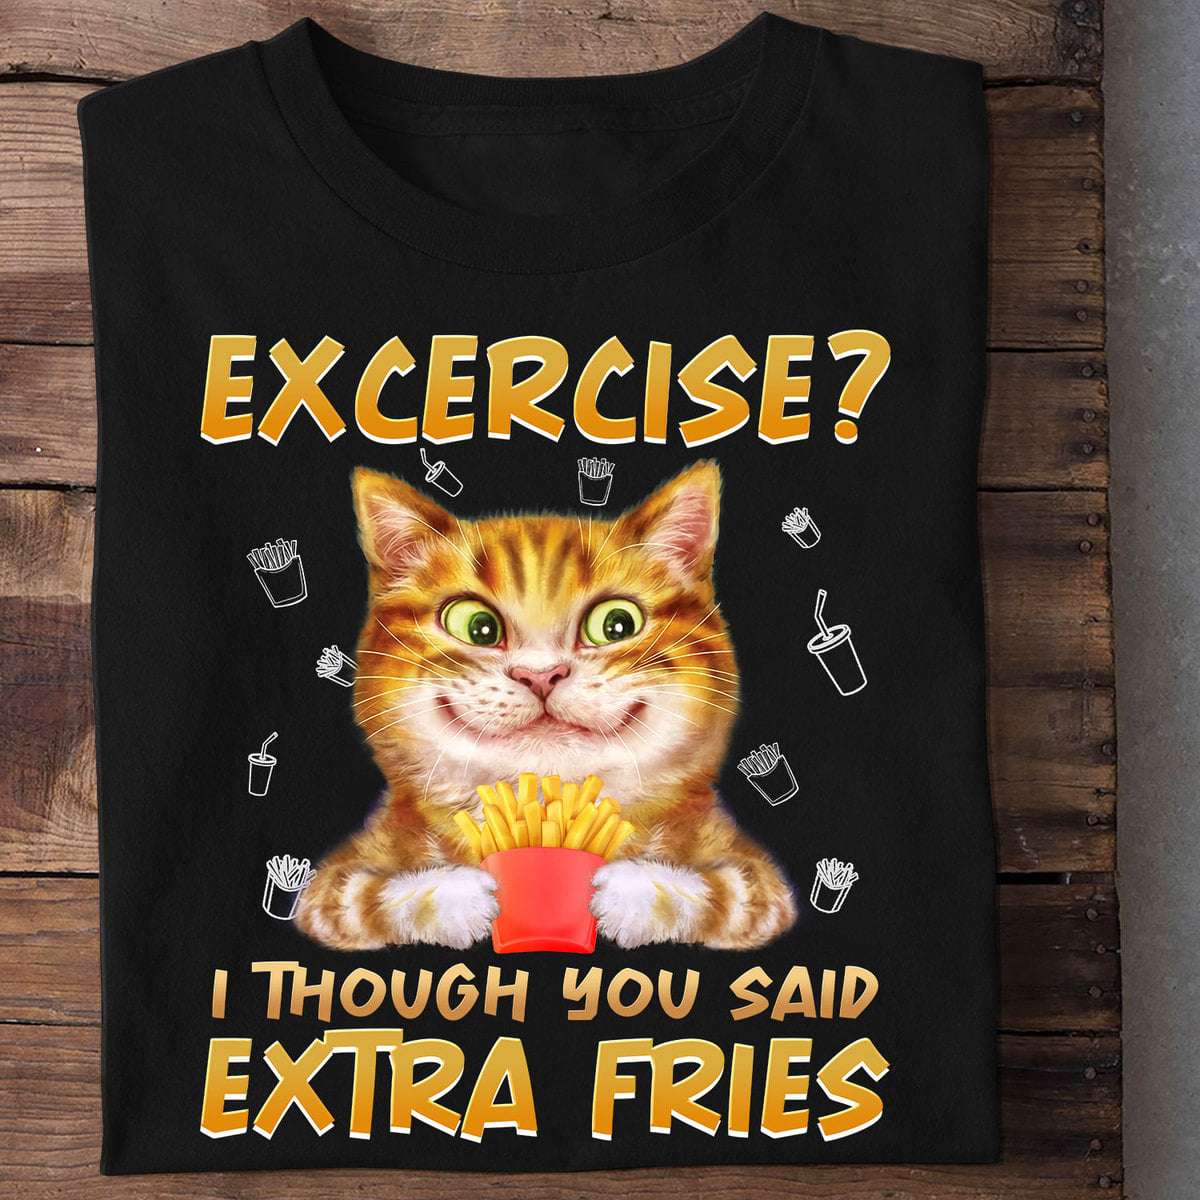 Cat And Fries - Excercise? I though you said extra fries